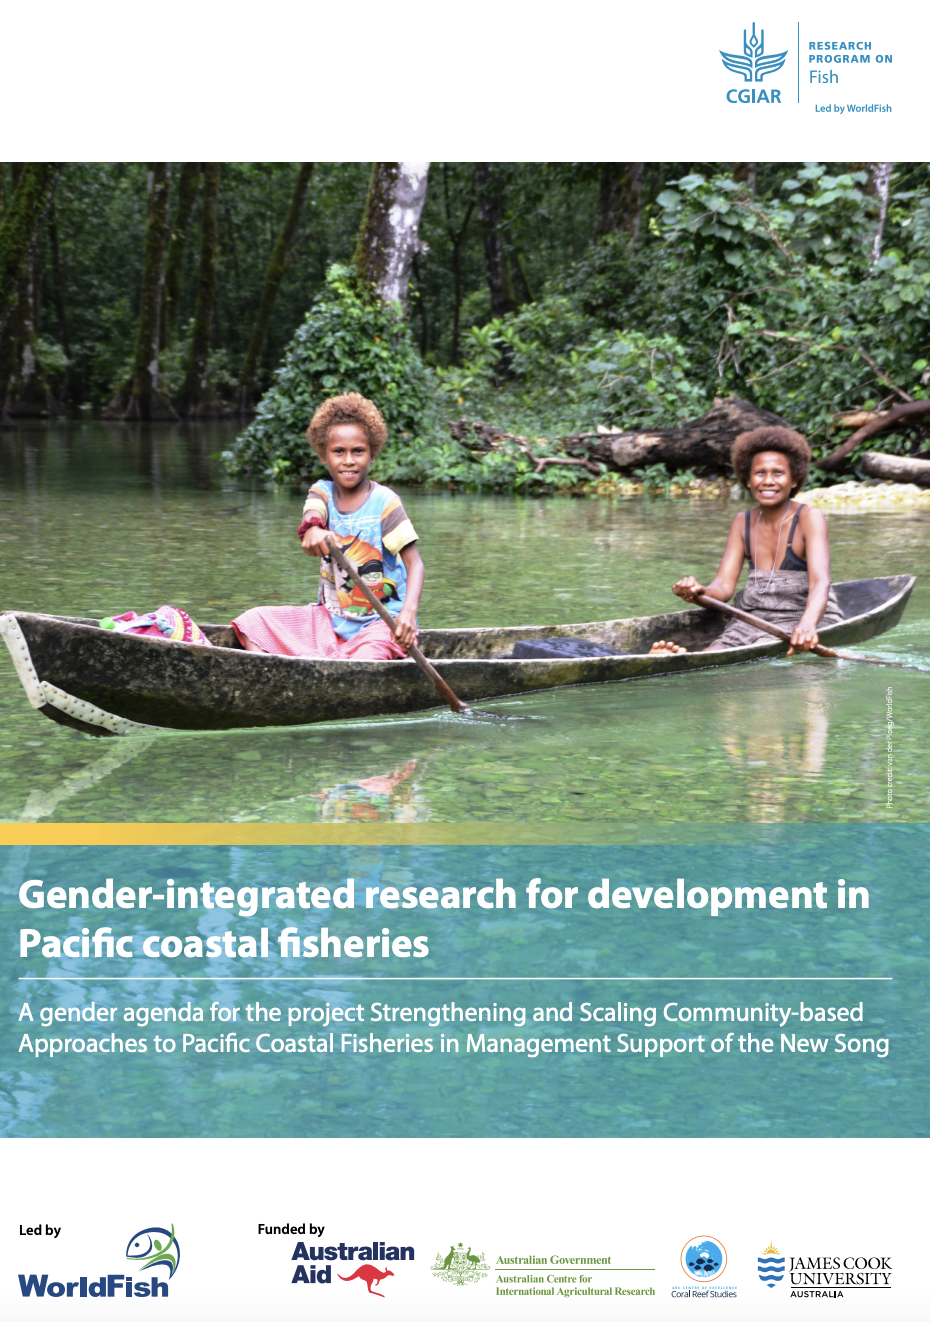 Gender-integrated research for development in Pacific coastal fisheries